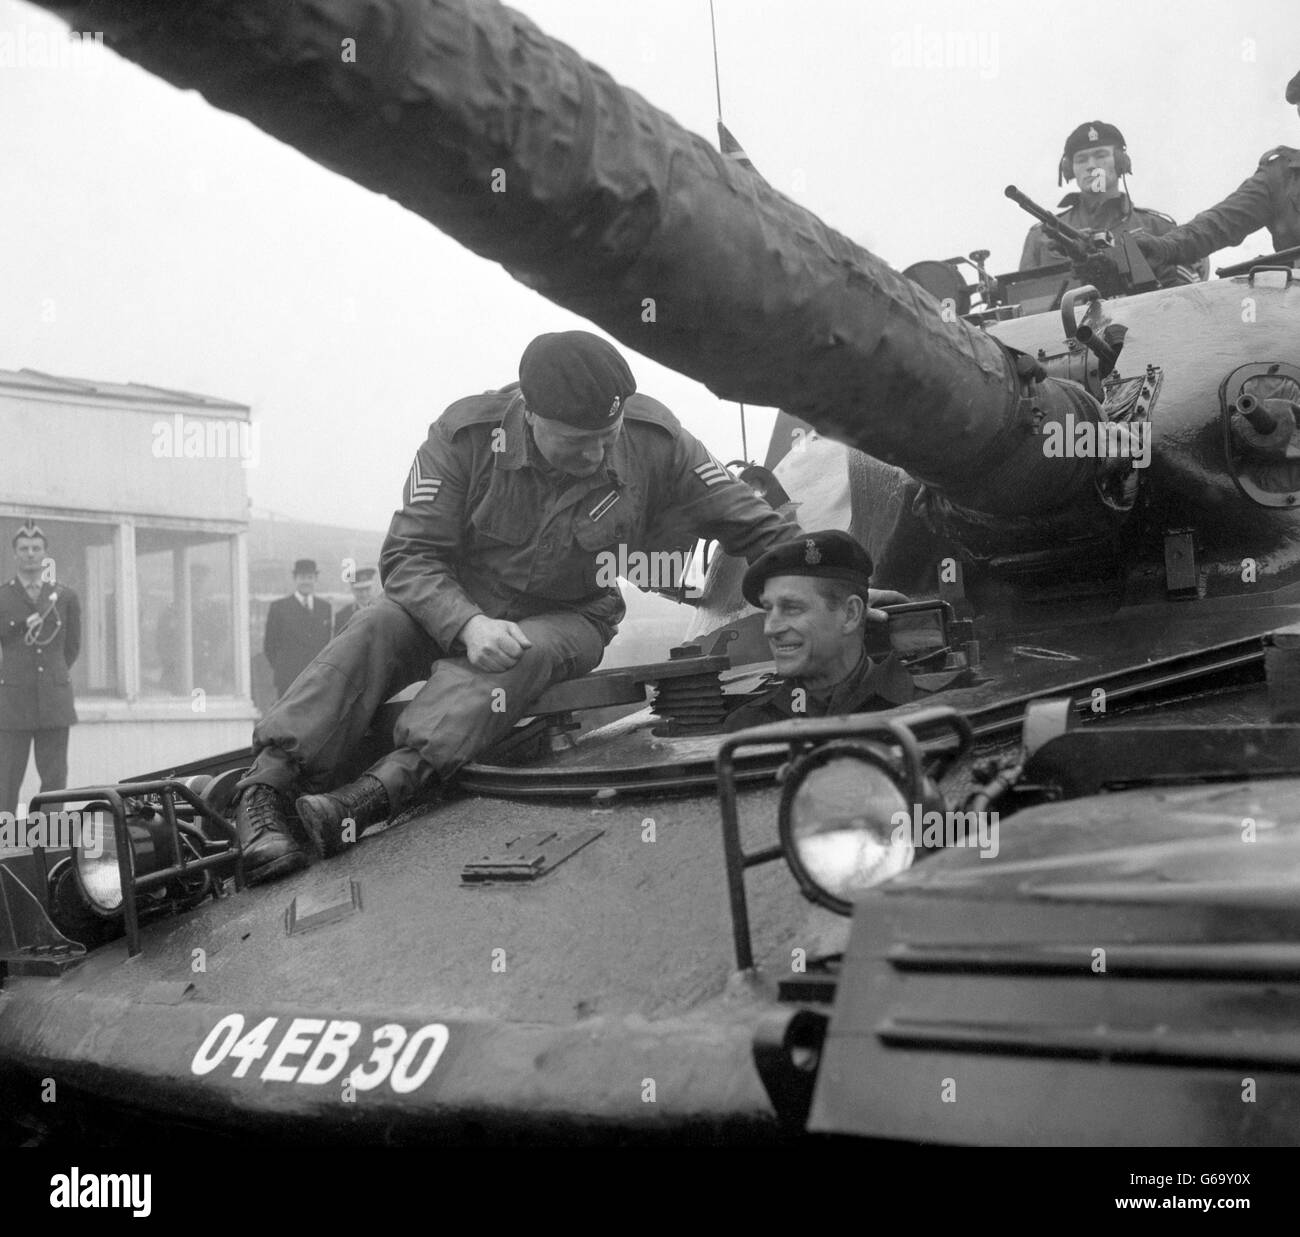 Prince Philip, The Duke of Edinburgh, in the driving seat of a 50-ton Chieftan tank during his visit to the Queen's Royal Irish Hussars at the Royal Armoured Corps Centre at Bovington Camp, Dorset. According to his instructor, Sgt Bill McLernon, 31, FROM Co Antrim, the Duke made a 'a very good show' at his first attempt at driving the tank. The Duke was visiting the regiment as Colonel-in-Chief Stock Photo